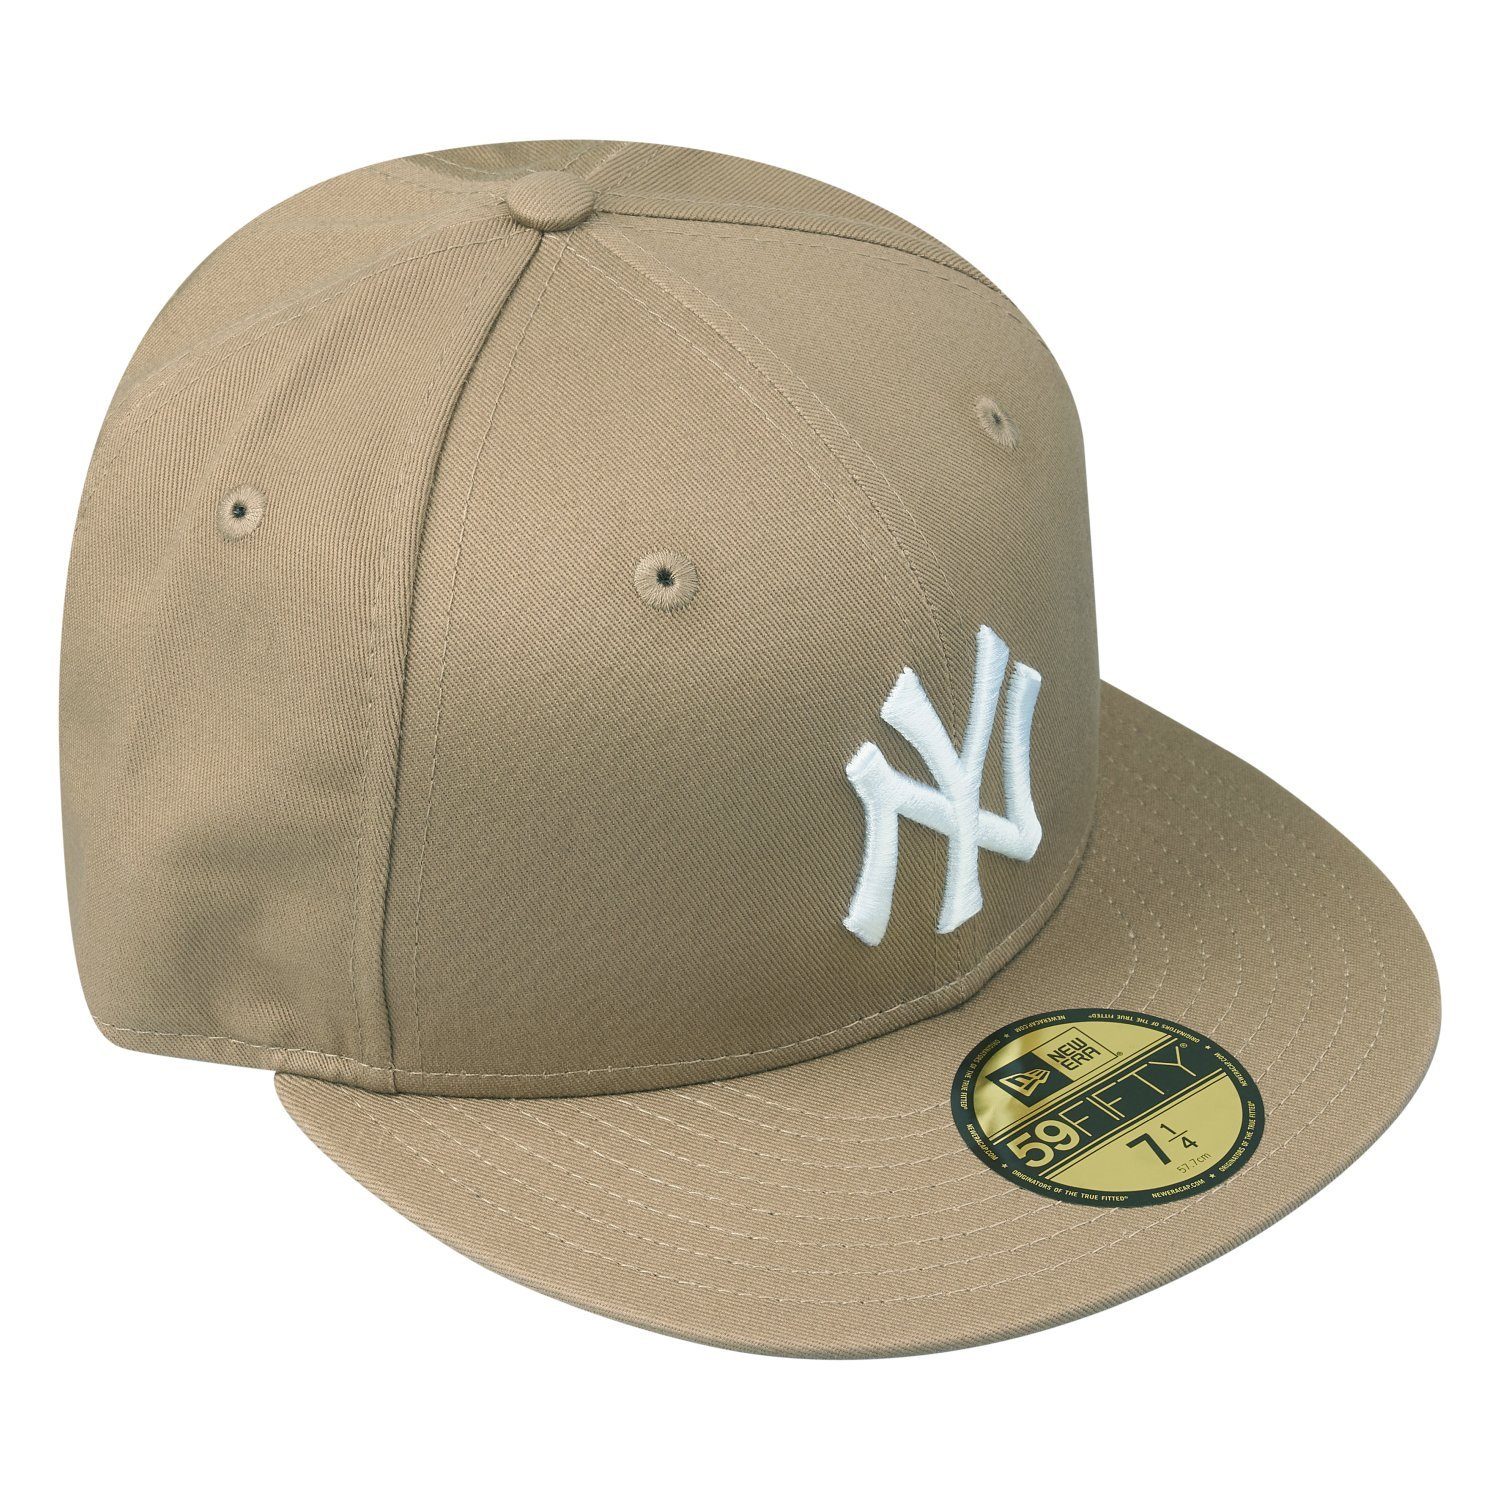 New Era Yankees York Fitted New Cap 59Fifty